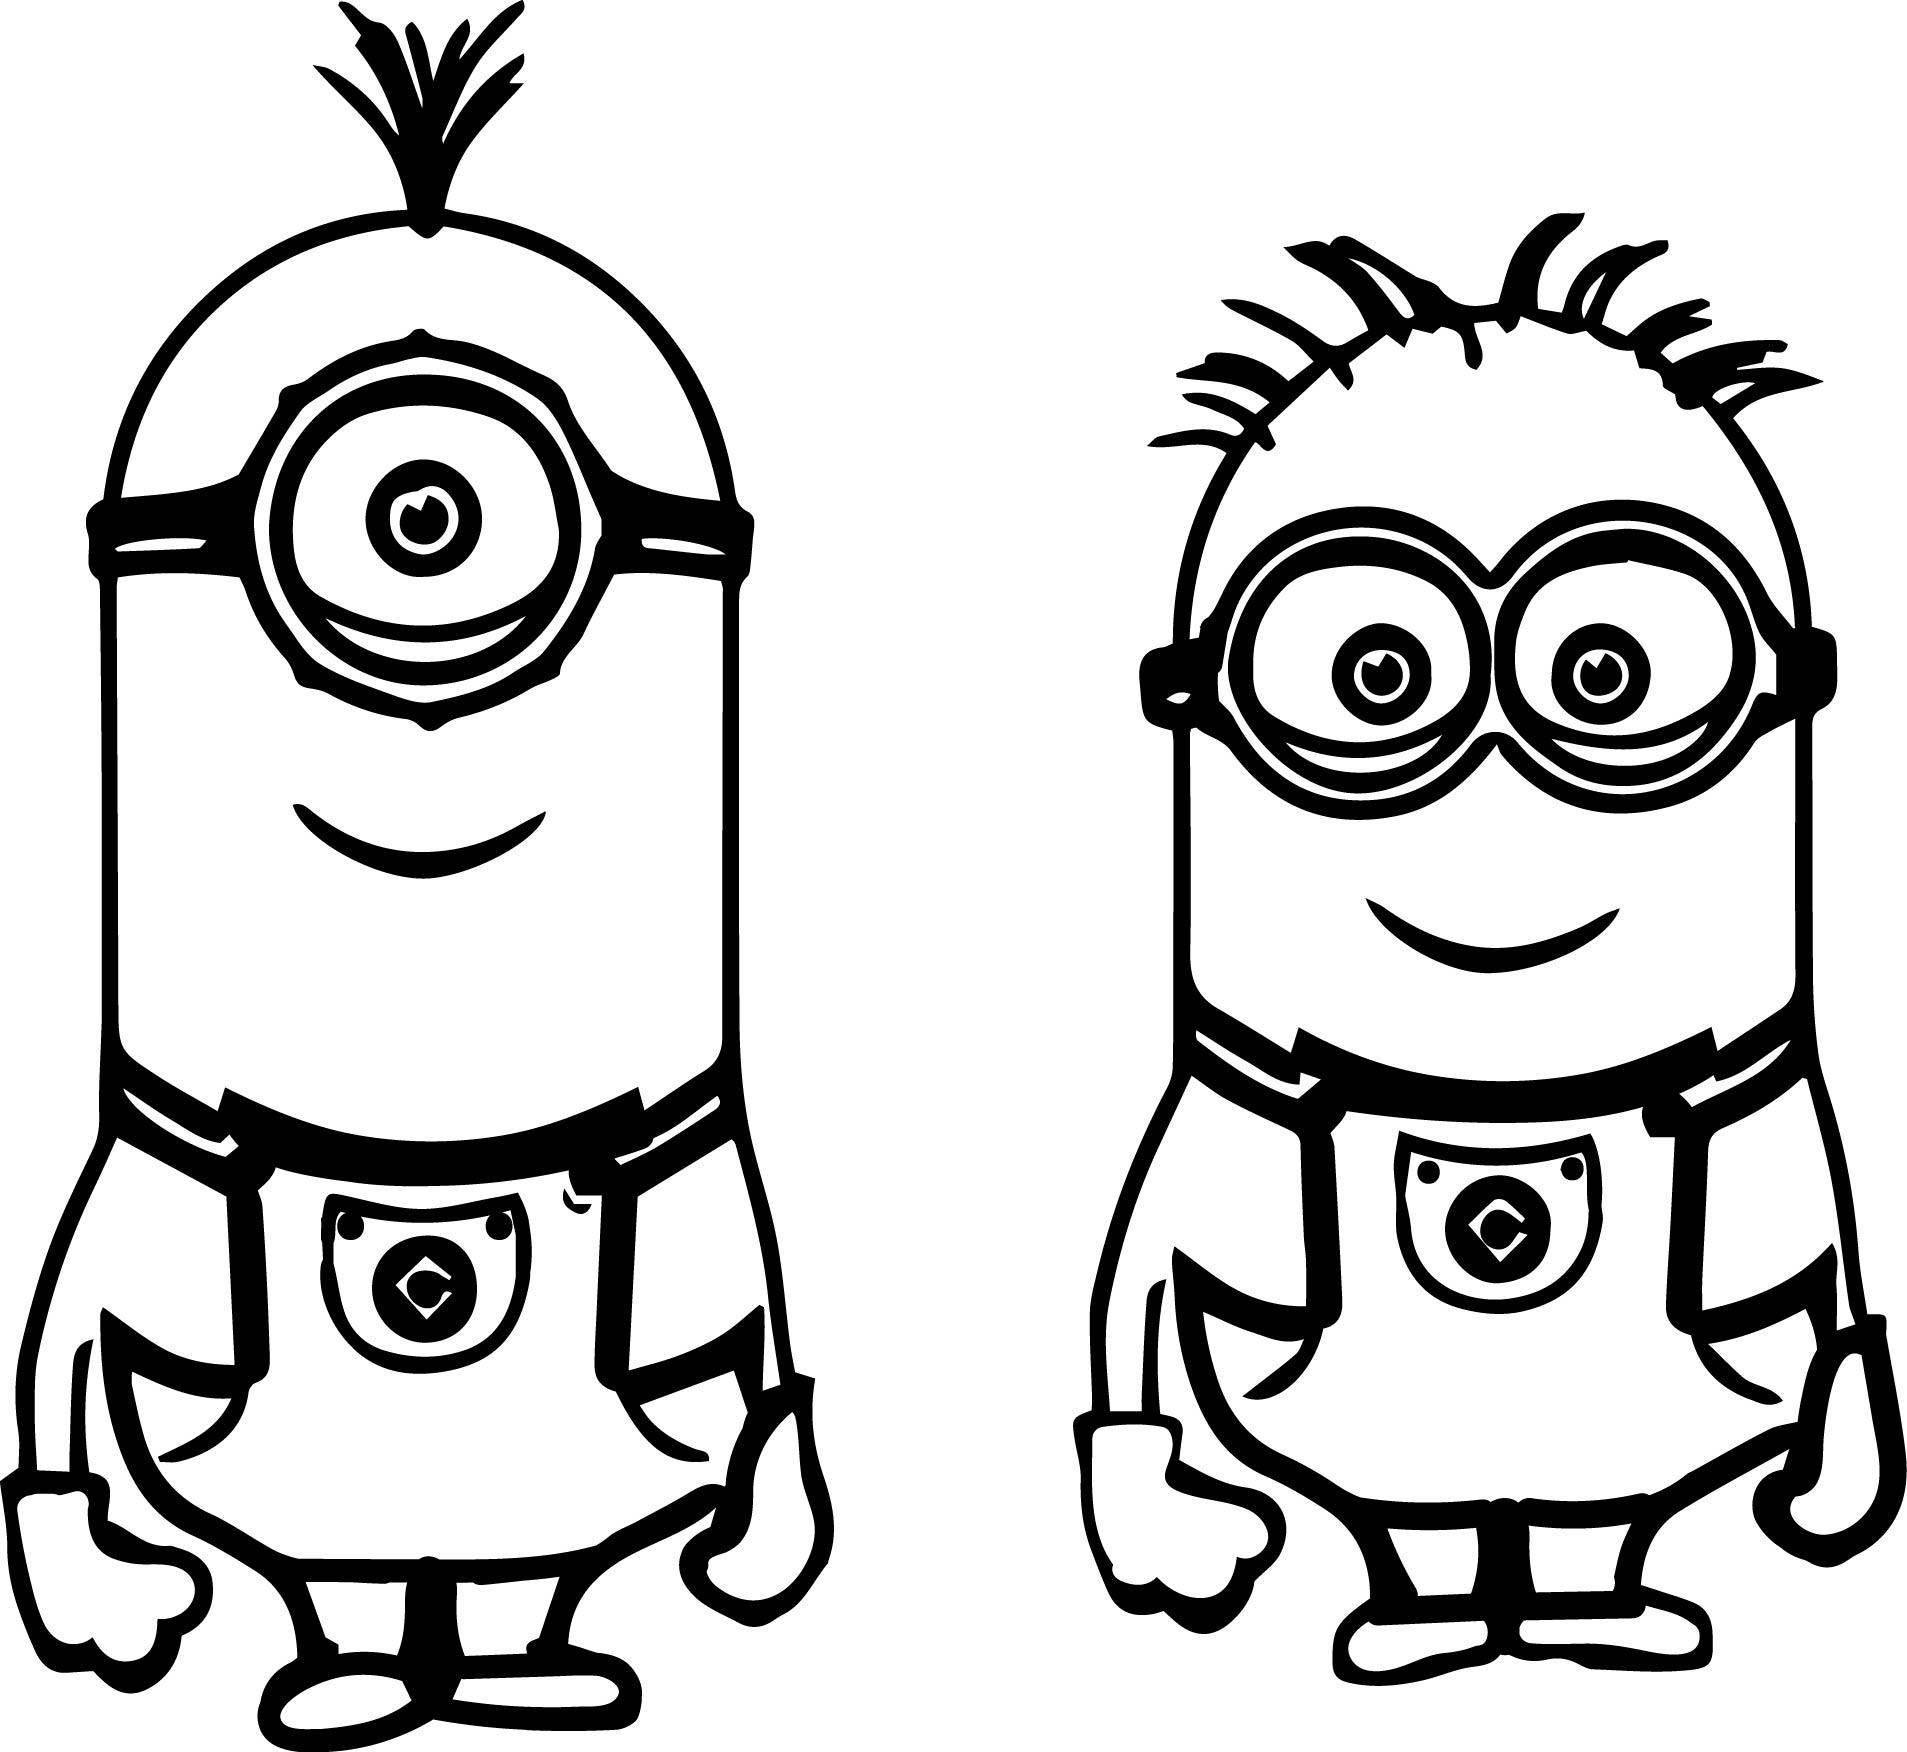 minions coloring pages minion coloring pages best coloring pages for kids minions coloring pages 1 1